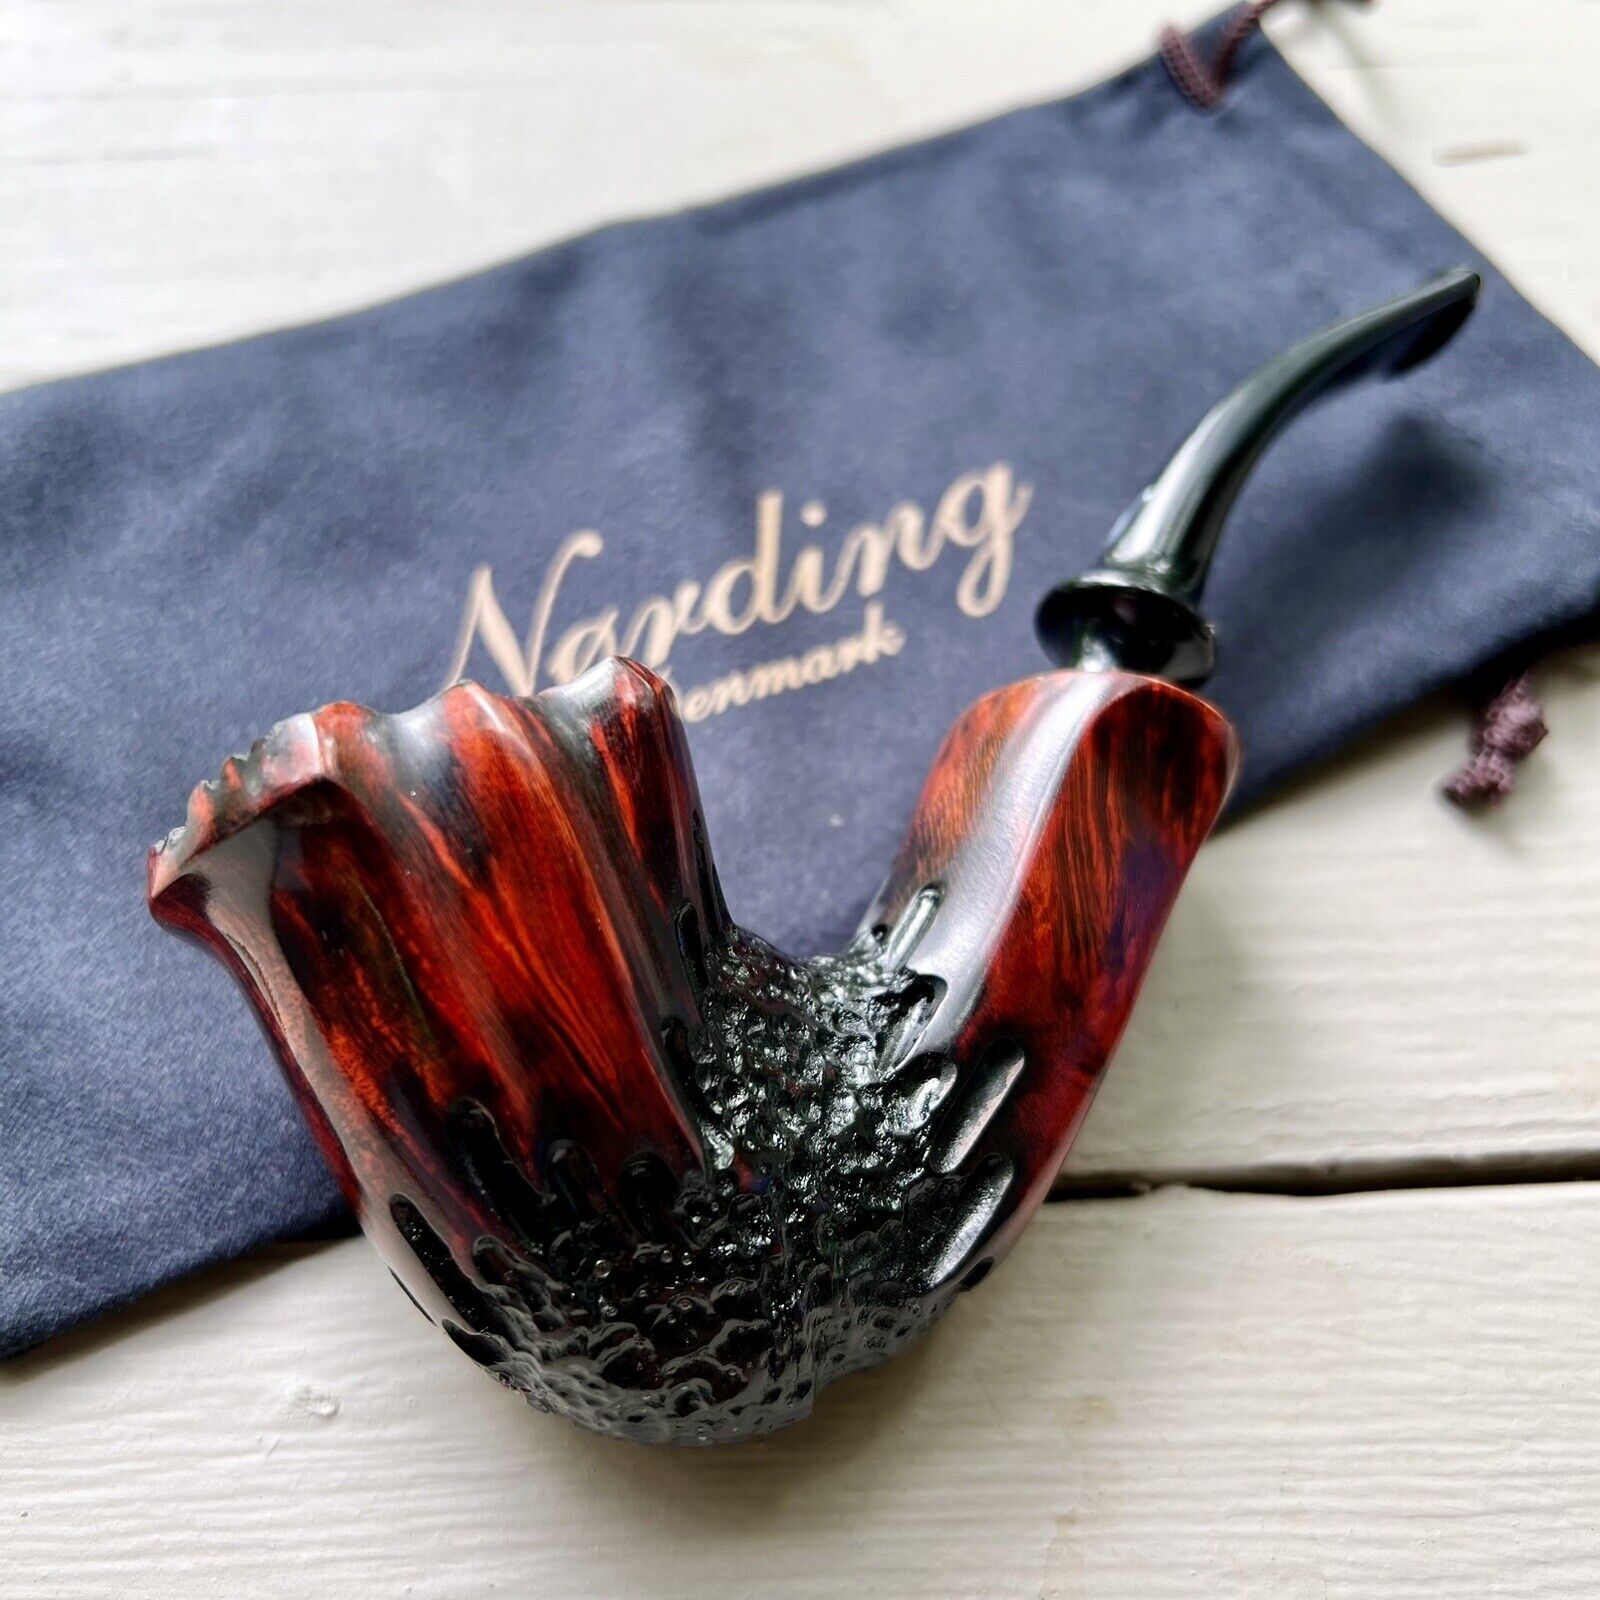 Eric Nording Rustic #4 Freehand Briar Tobacco Pipe - NEW